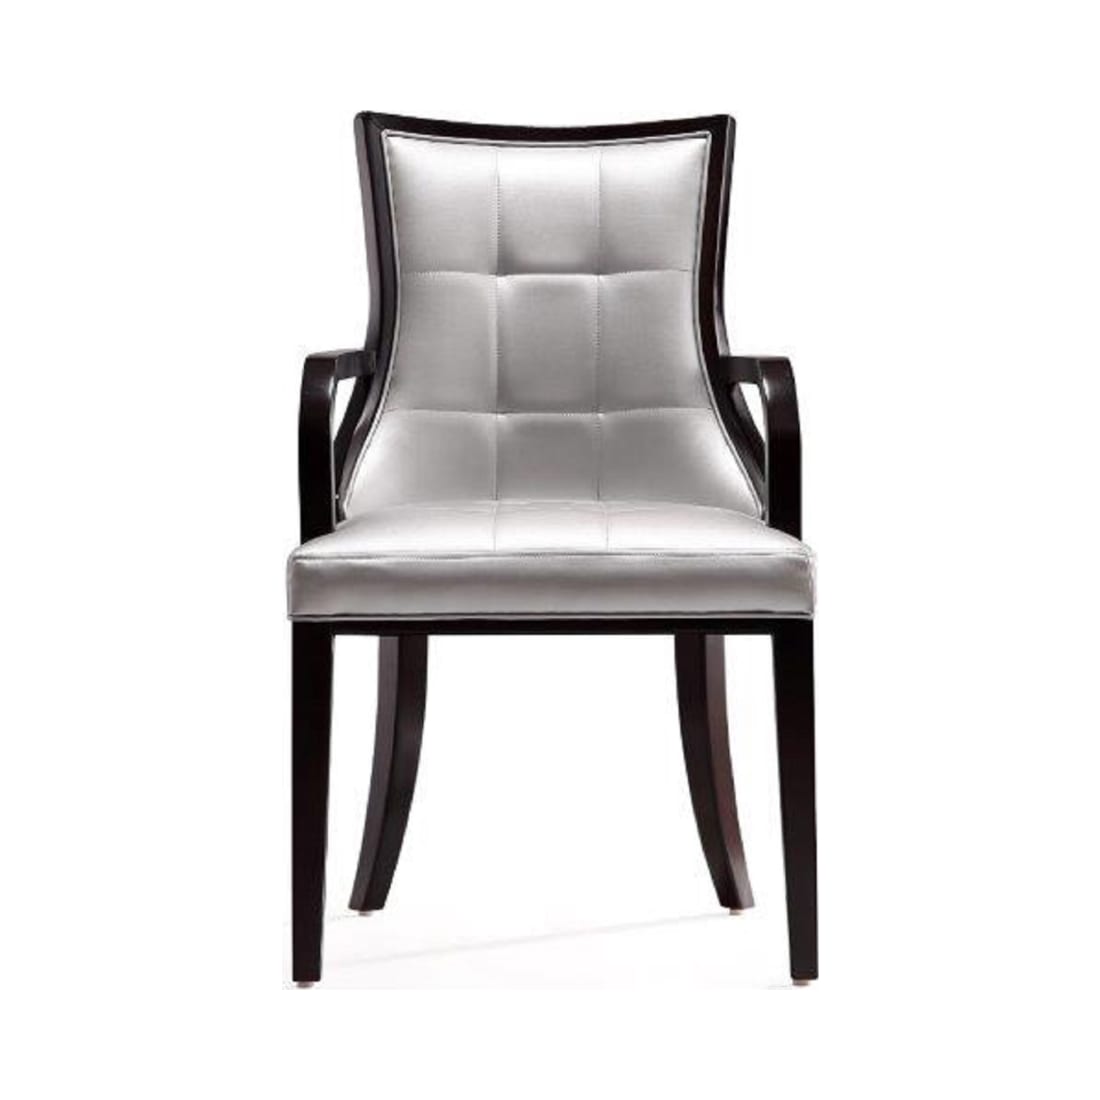 Fifth Avenue Faux Leather Dining Armchair in Silver and Walnut